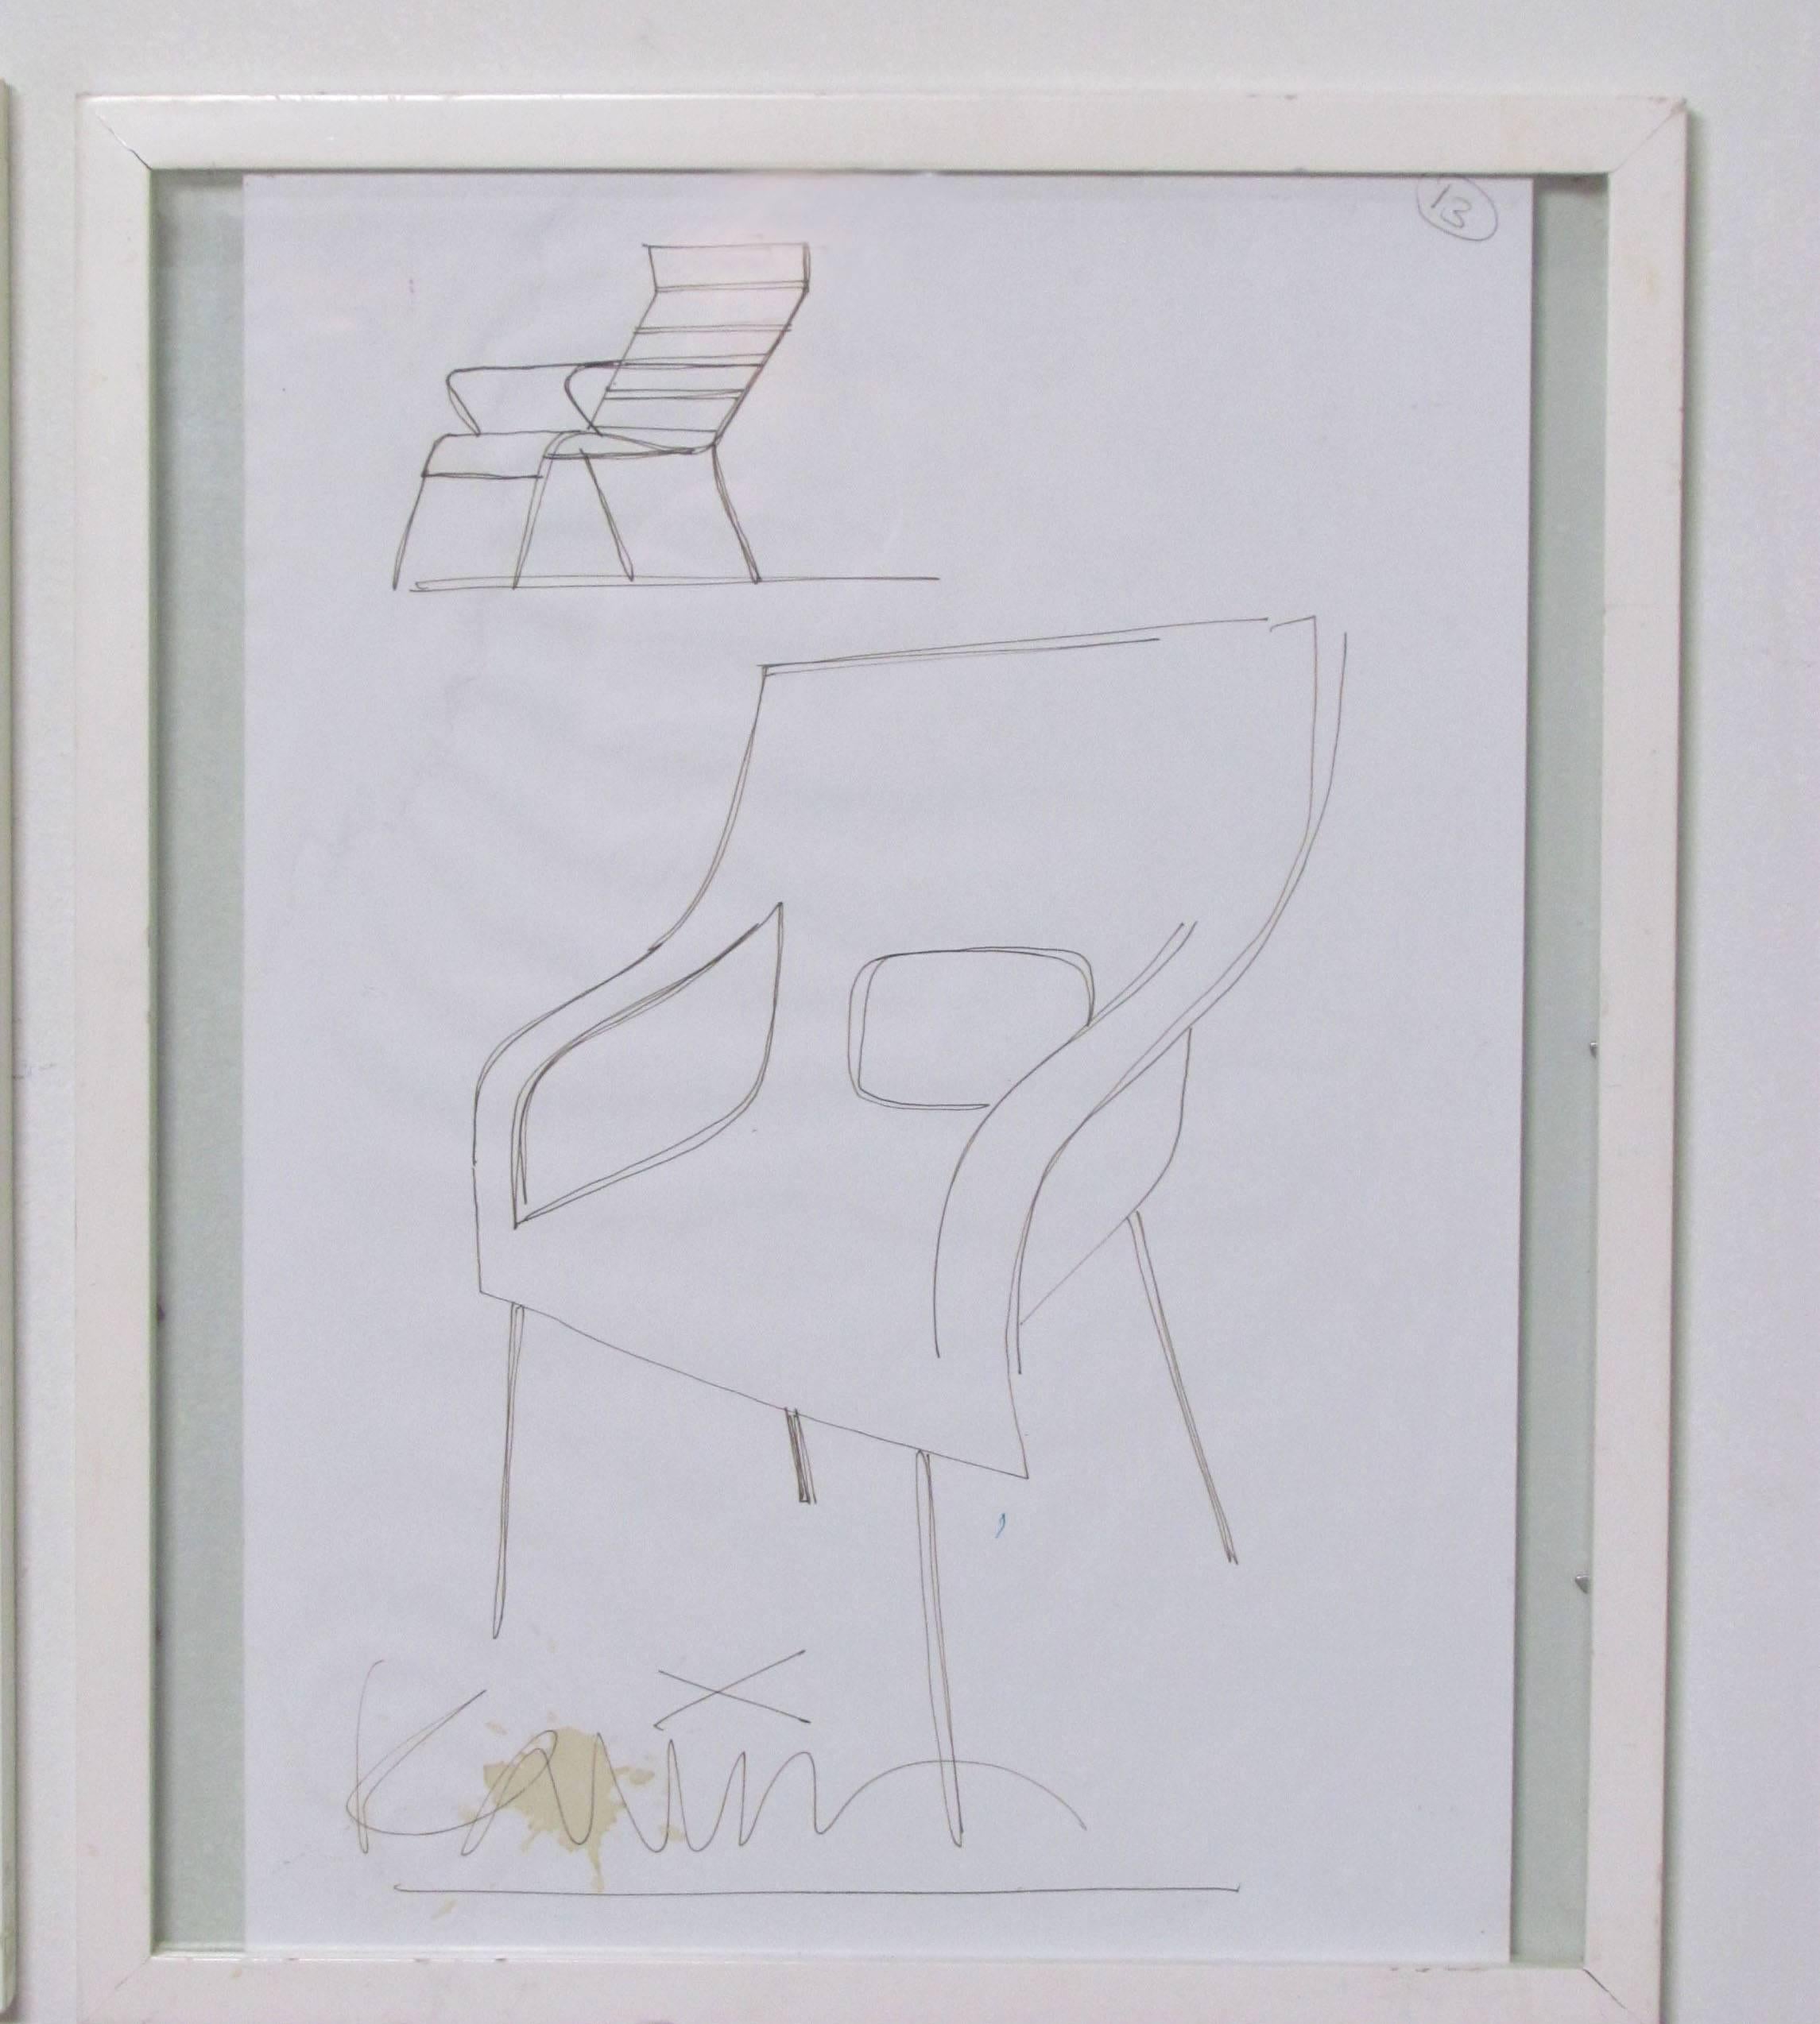 Set of three original prototype design pencil sketches by Karim Rashid, circa early 2000s. One bears Mr. Rashid's coffee stain. All three framed in simple two sided glass enclosed shadow boxes.